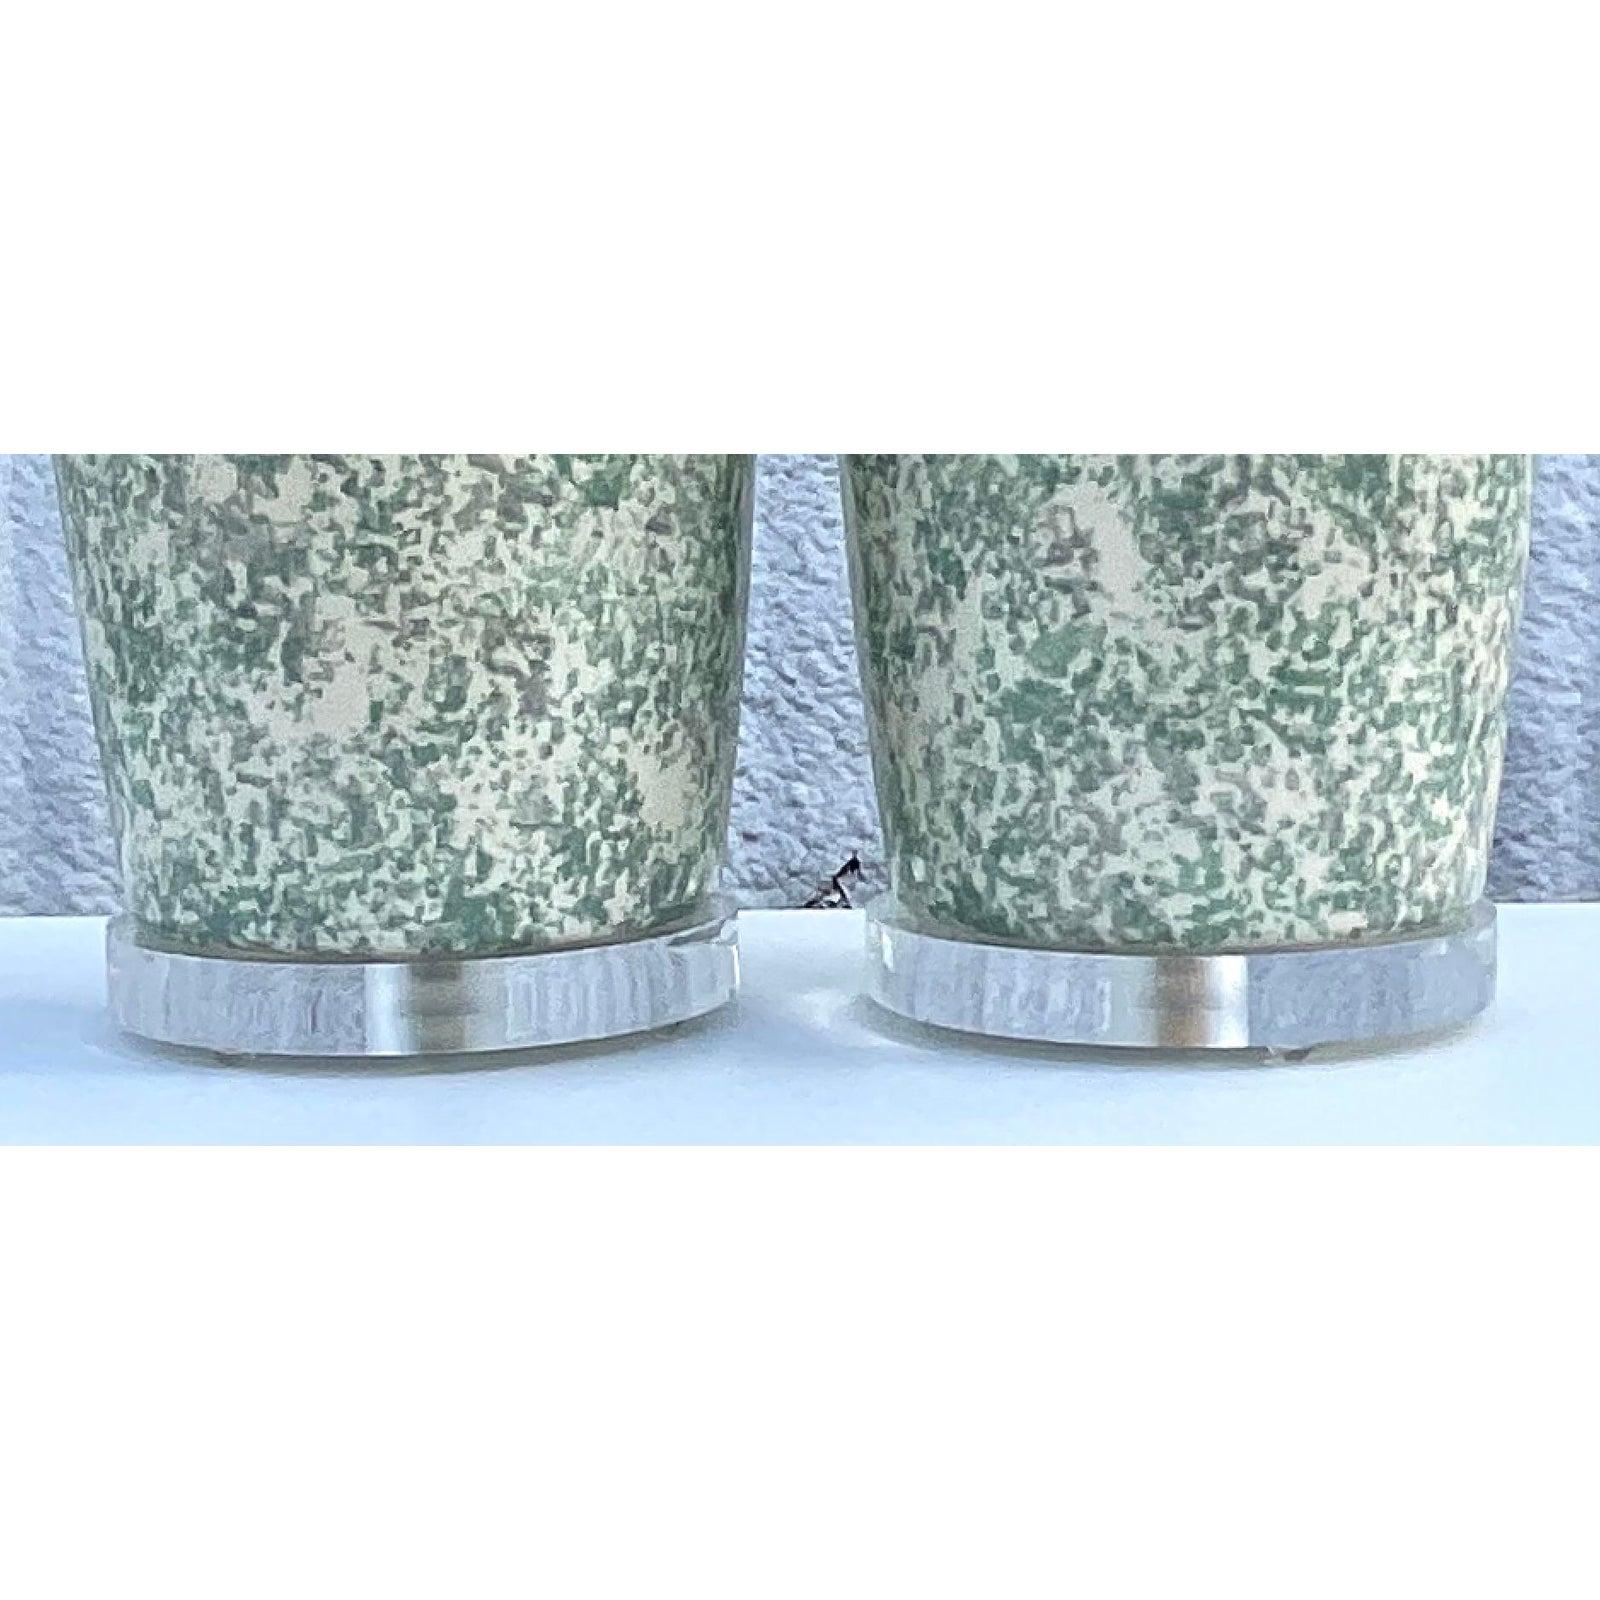 Fantastic pair of original Bauer lamps. Marked and dated 1986. Glazed ceramic urns with a mottled grey / green motif. Brass hardware. Acquired from a Palm Beach estate.